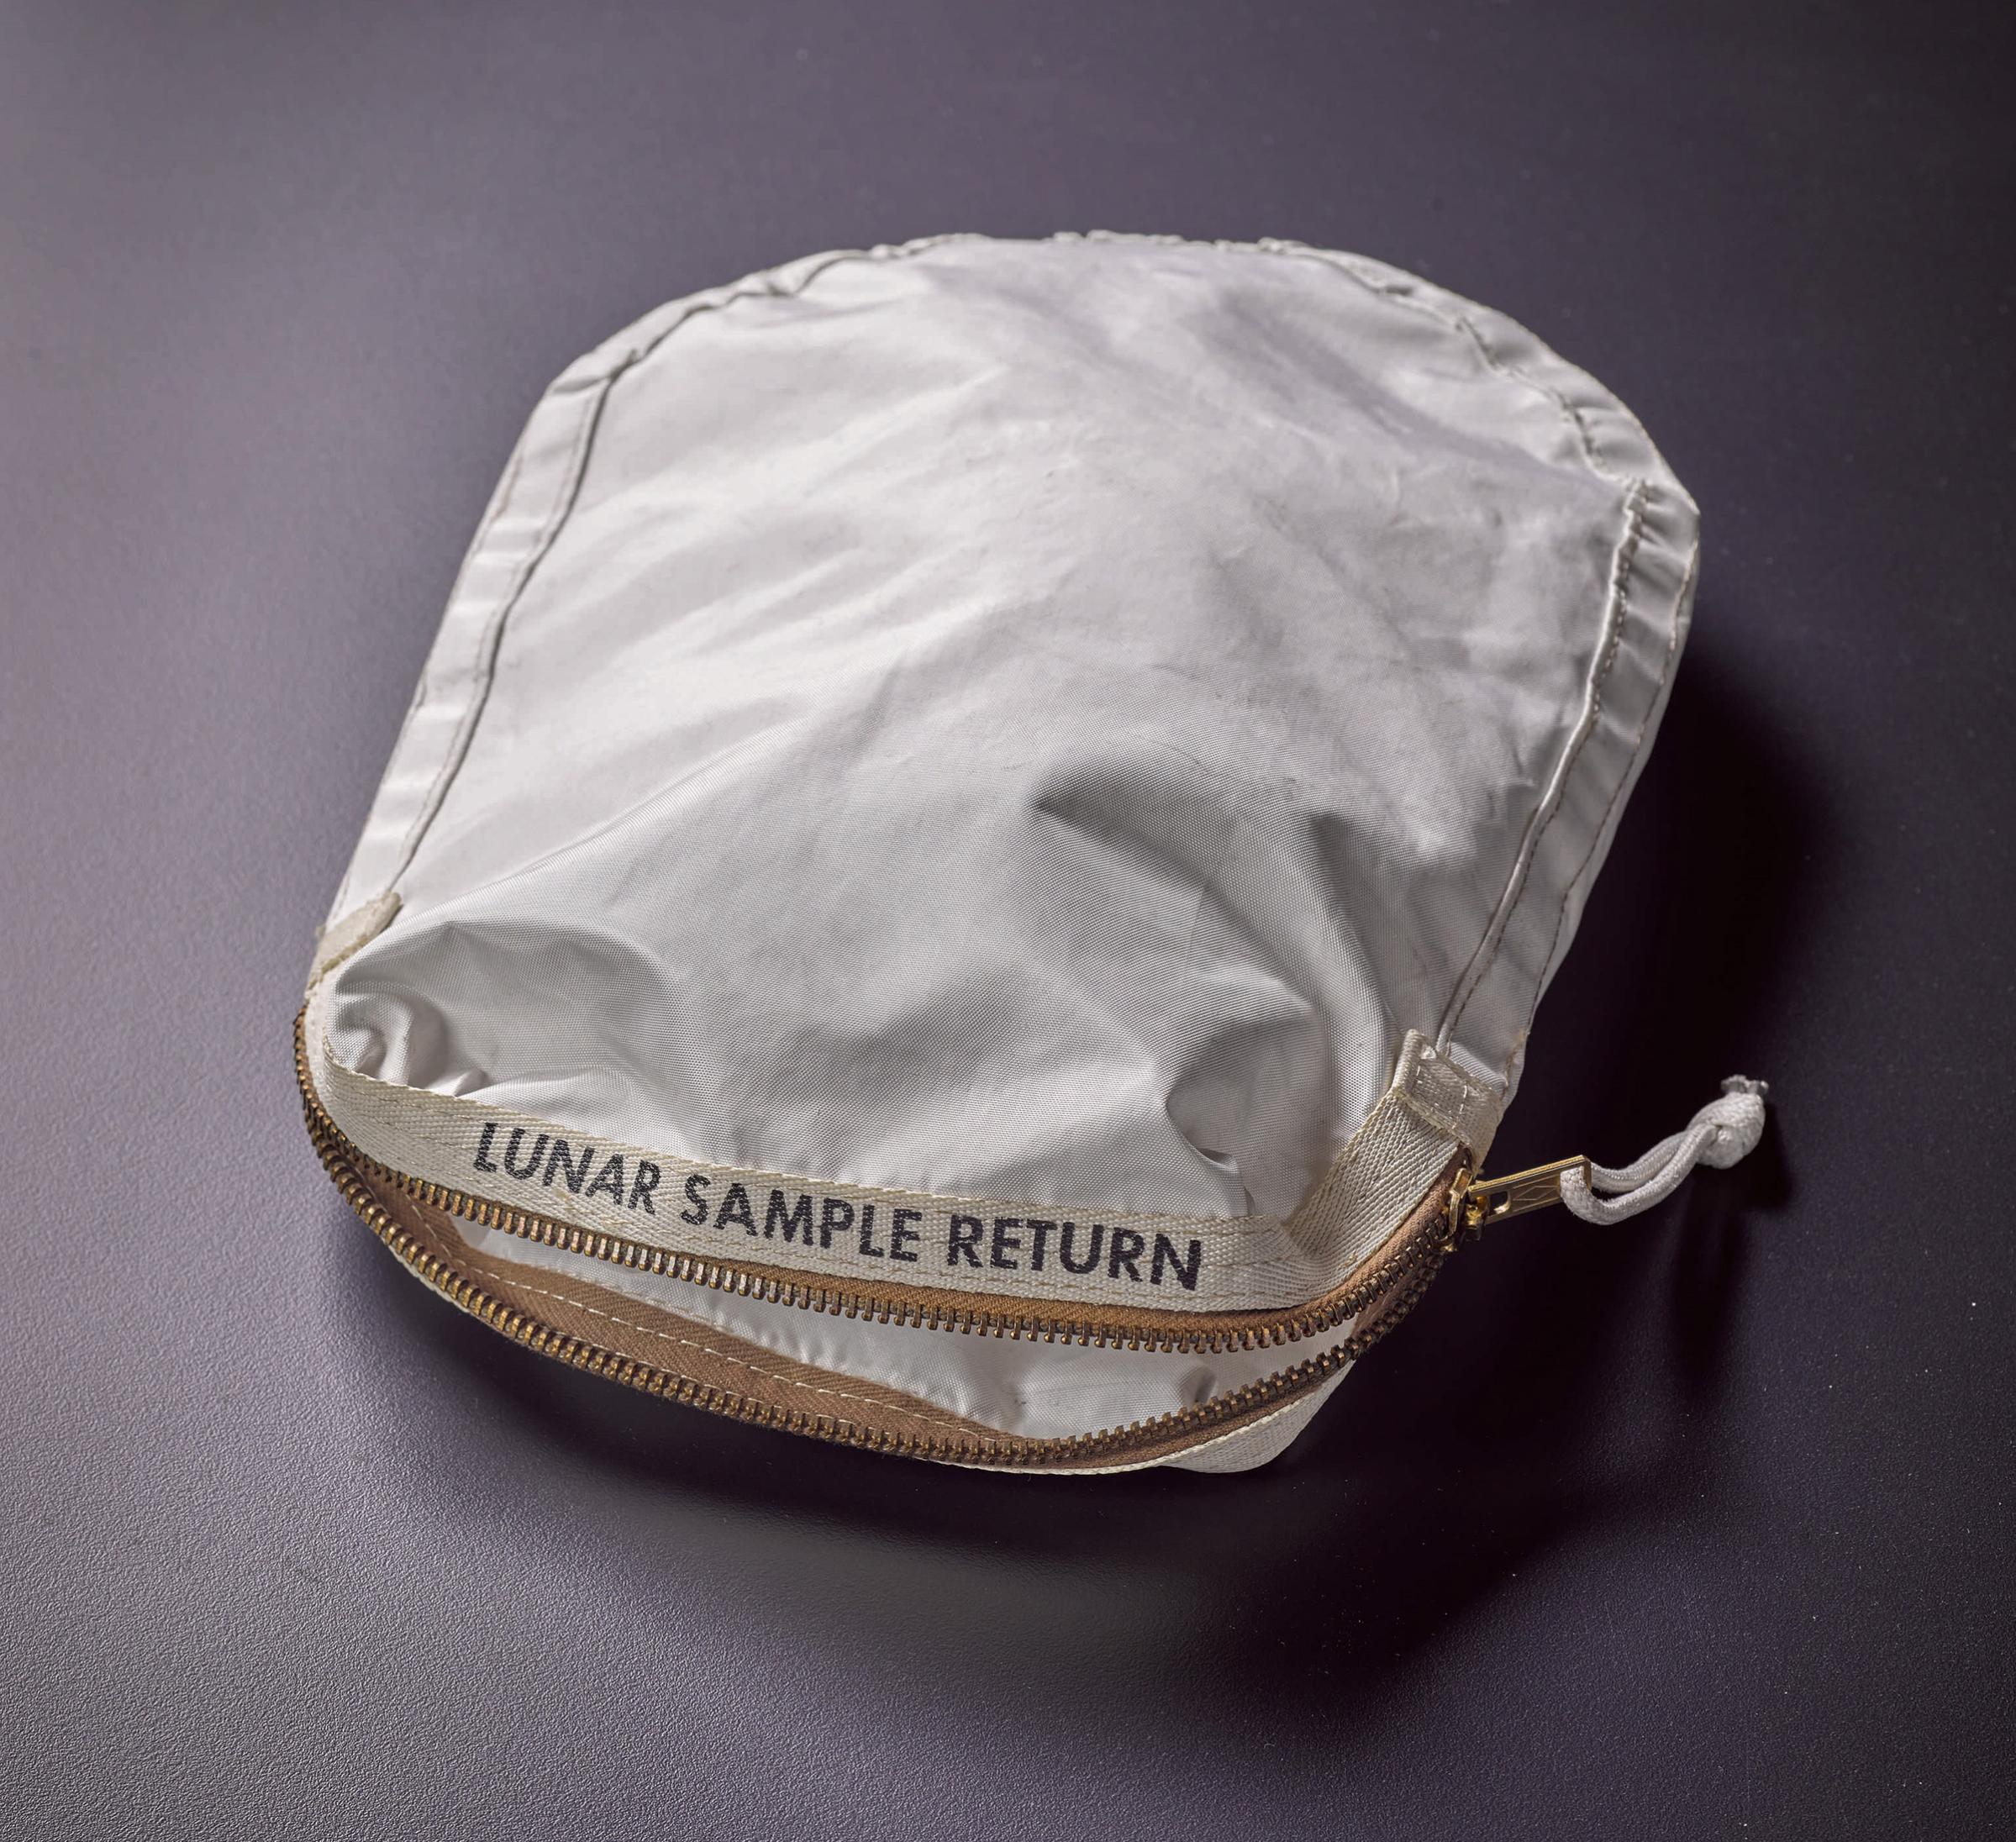 Apollo 11 Contingency Lunar Sample Return Bag. Used by Neil Armstrong on Apollo 11 to bring back the very first pieces of the moon ever collected – traces of which remain in the bag. The only such relic available for private ownership.